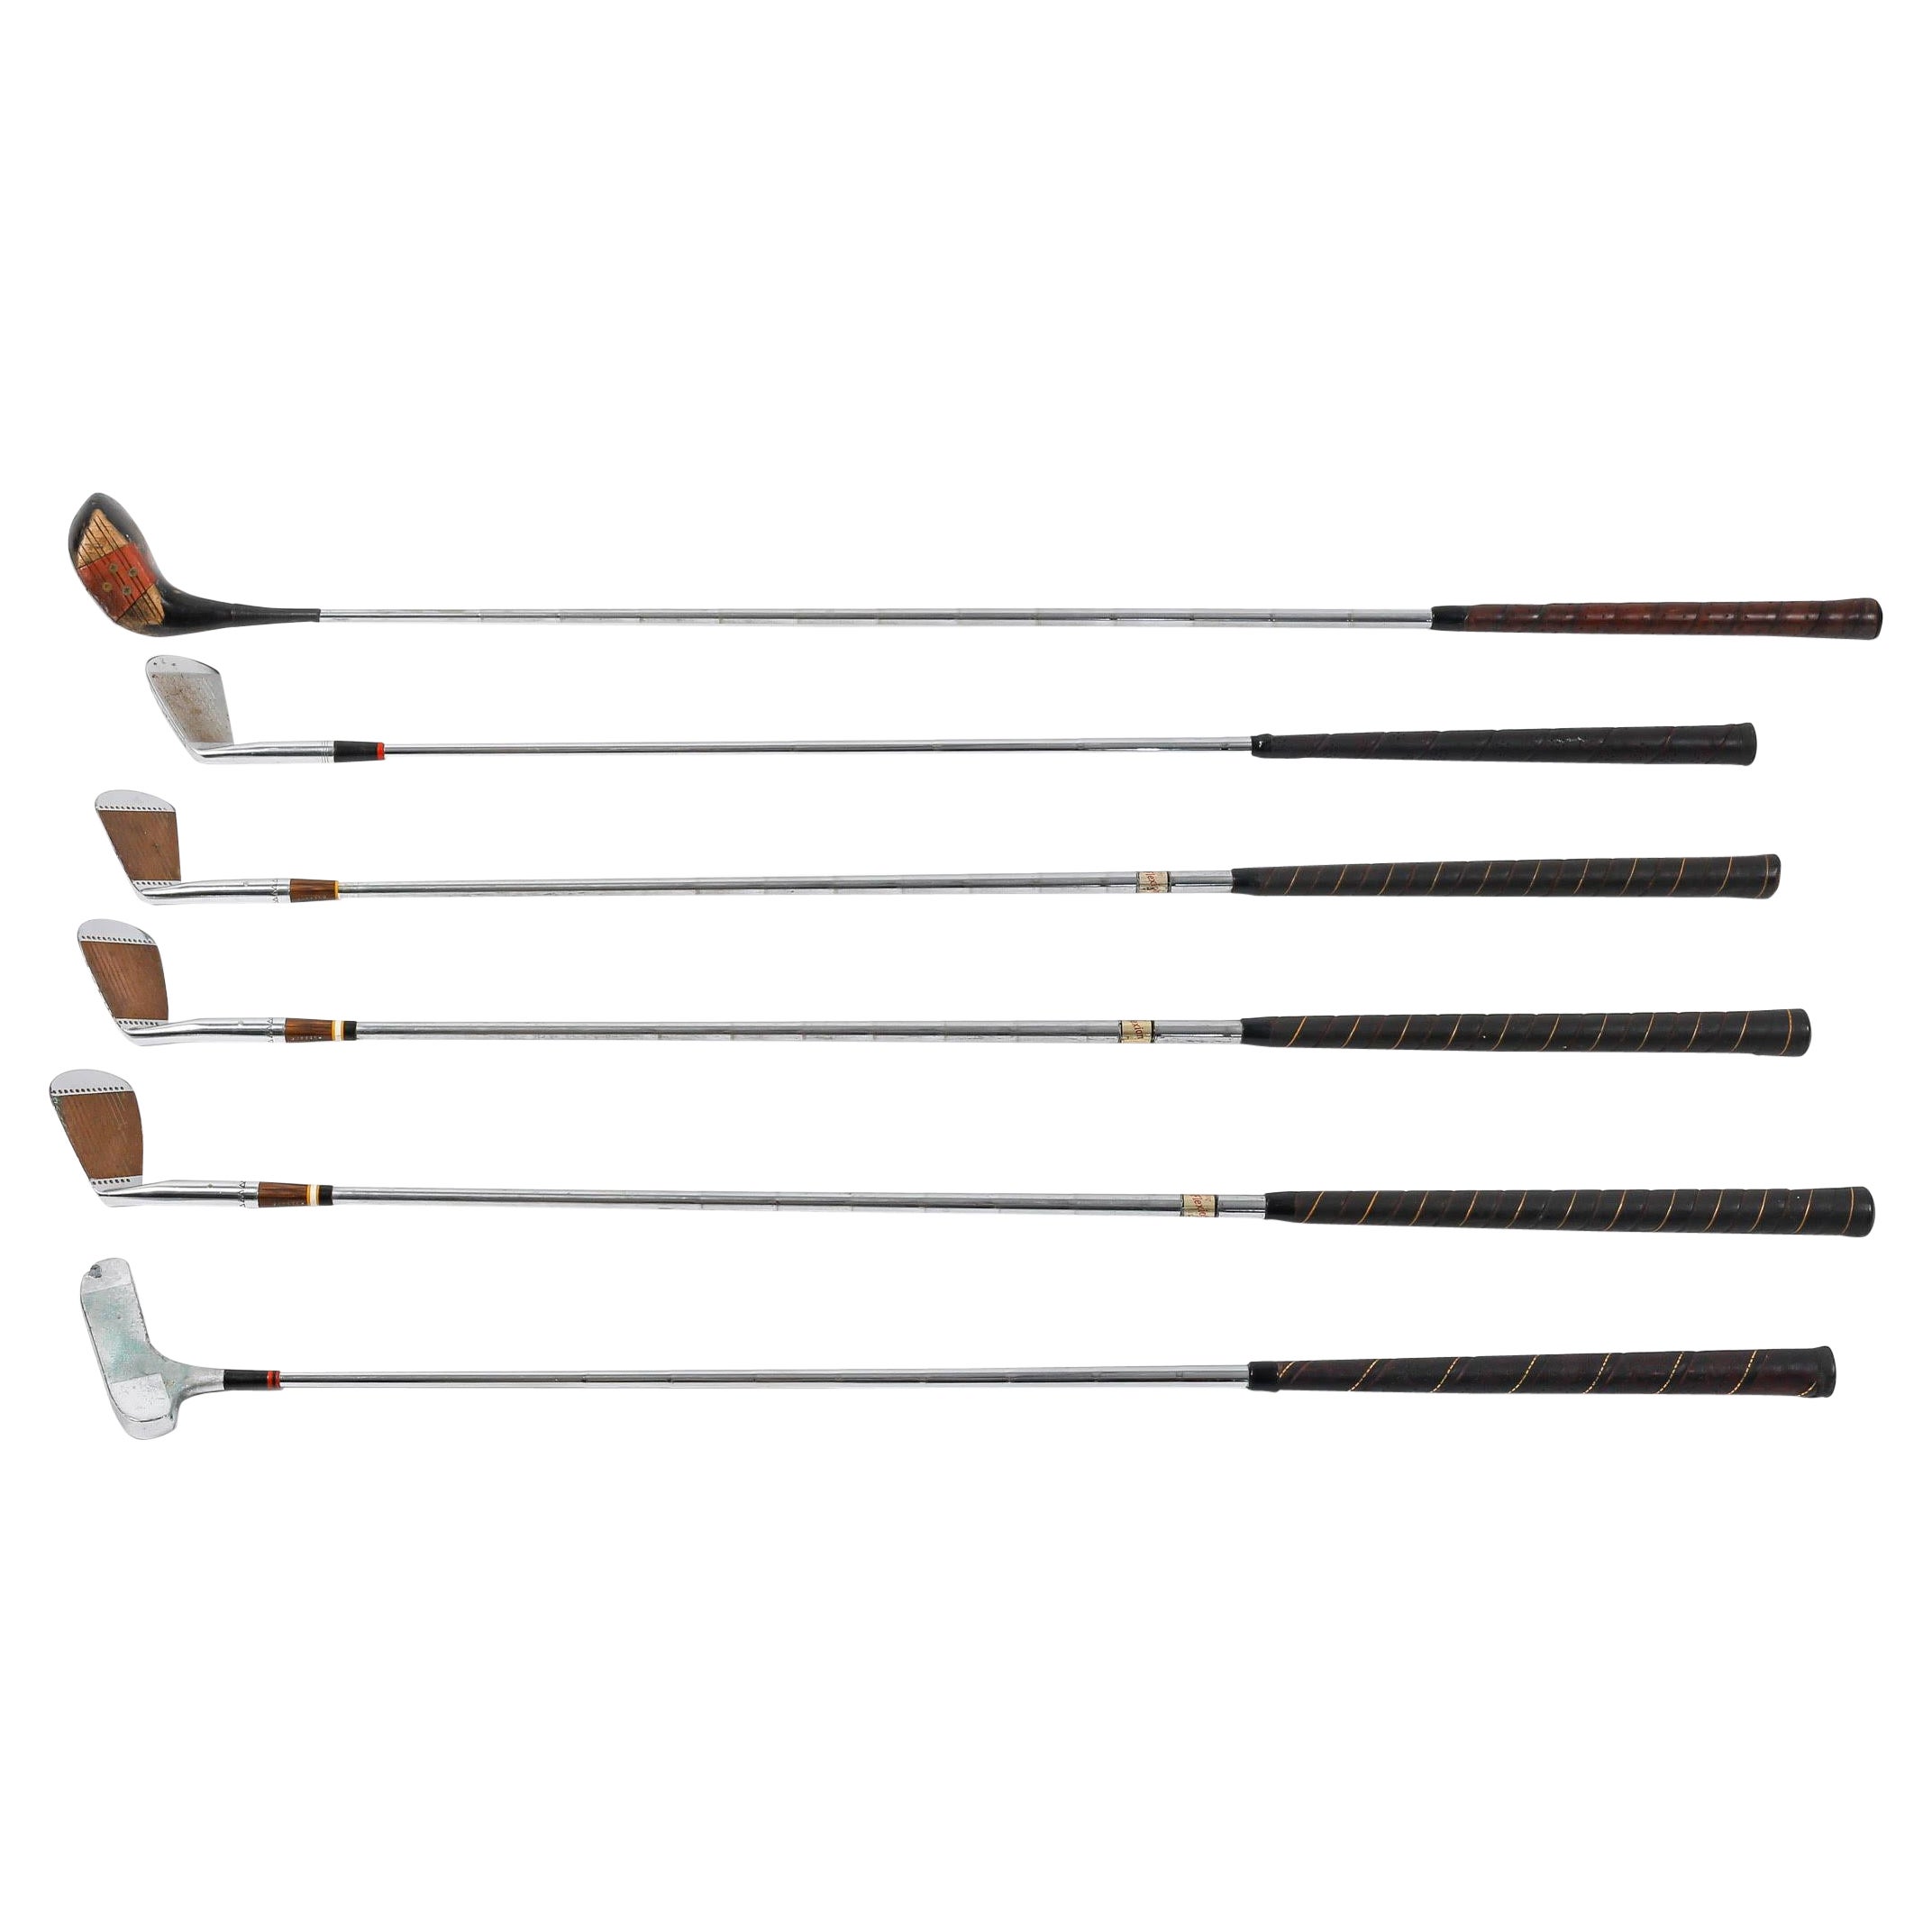 Suite of 6 Golf Clubs from the 1950s.